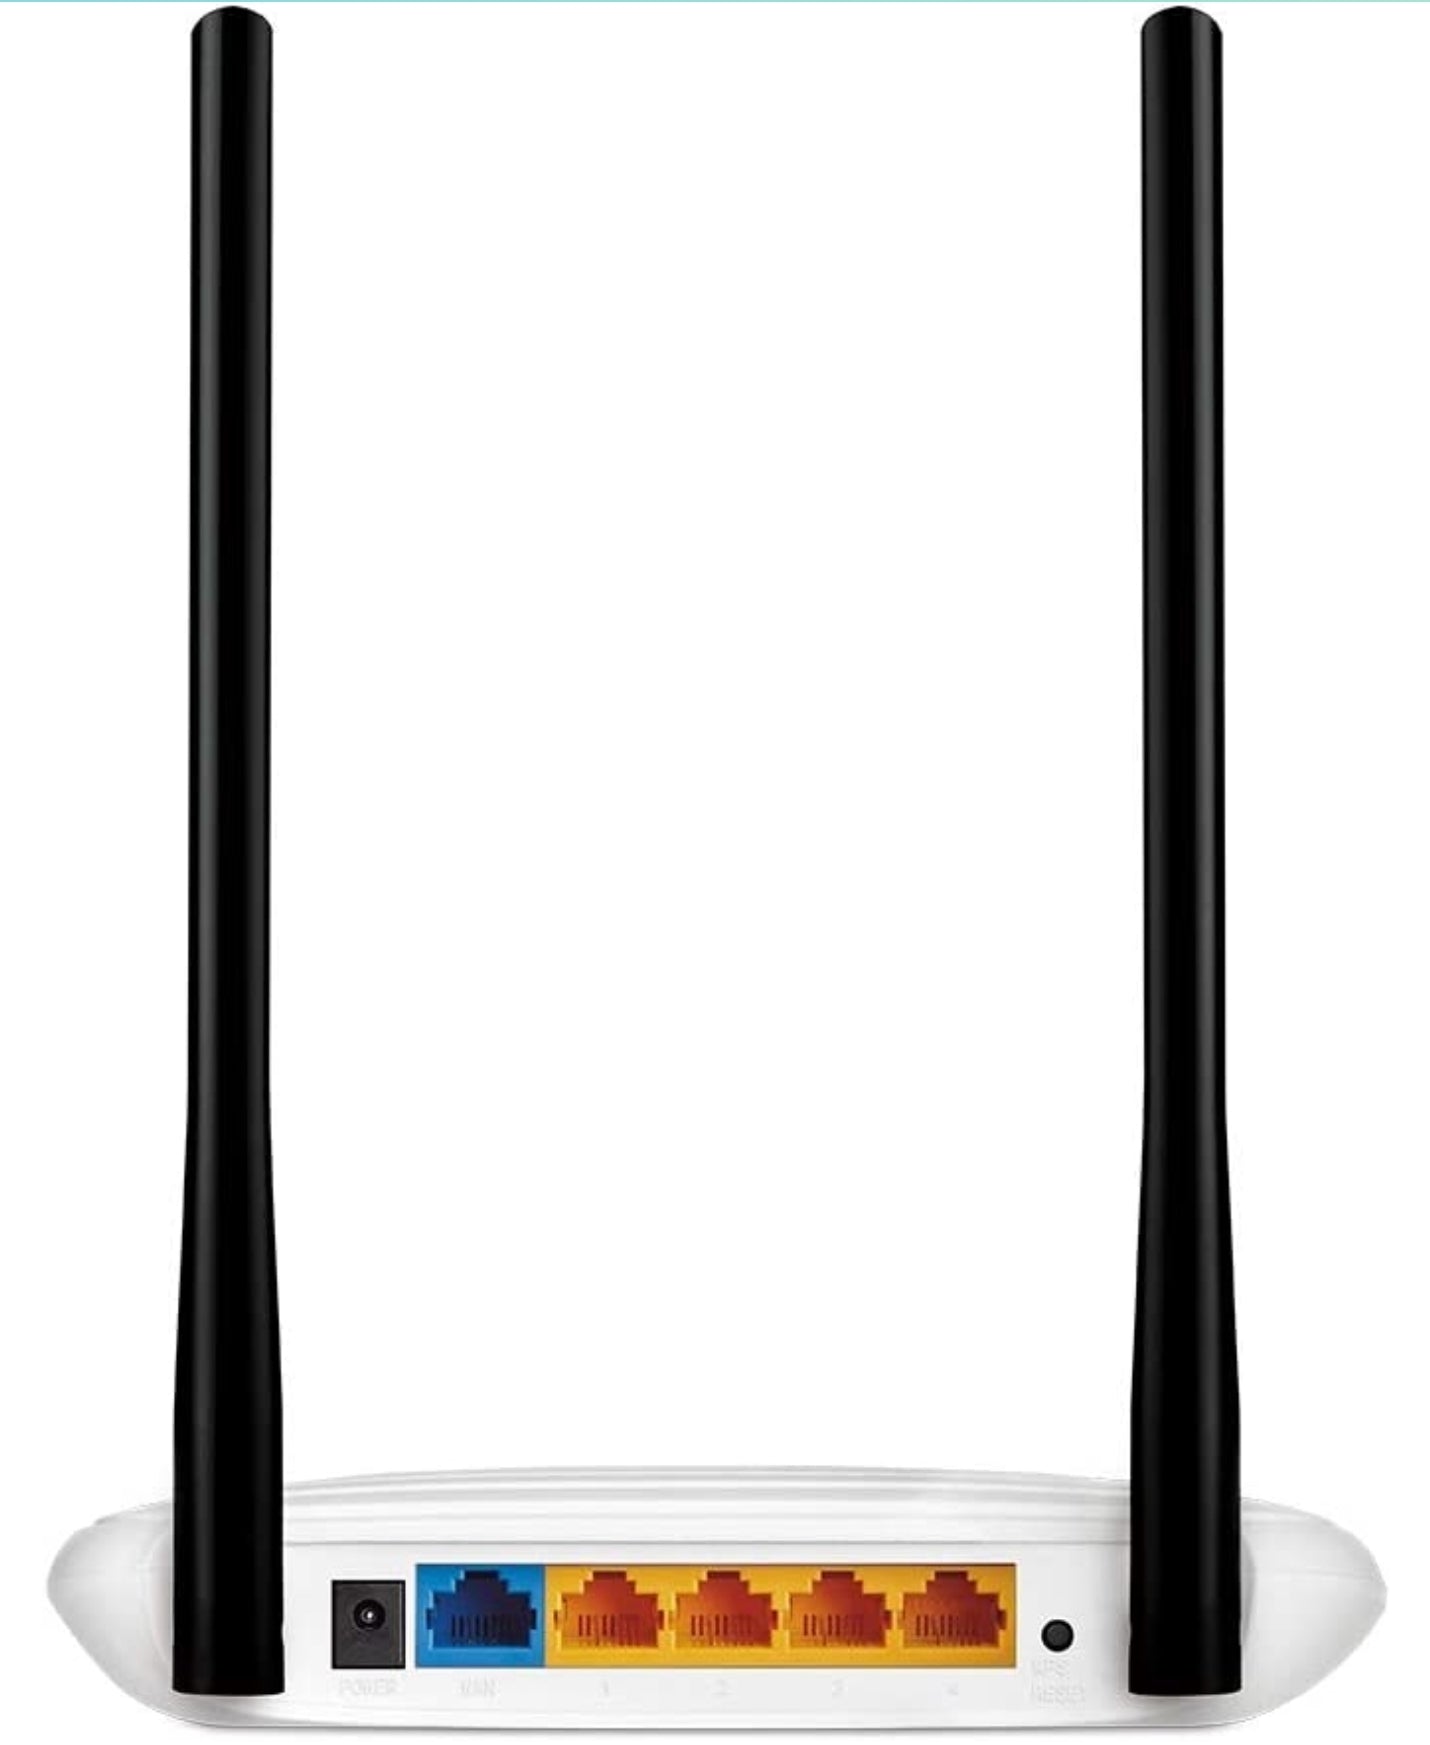 TP Link 2.4 GHz Wi-Fi Router